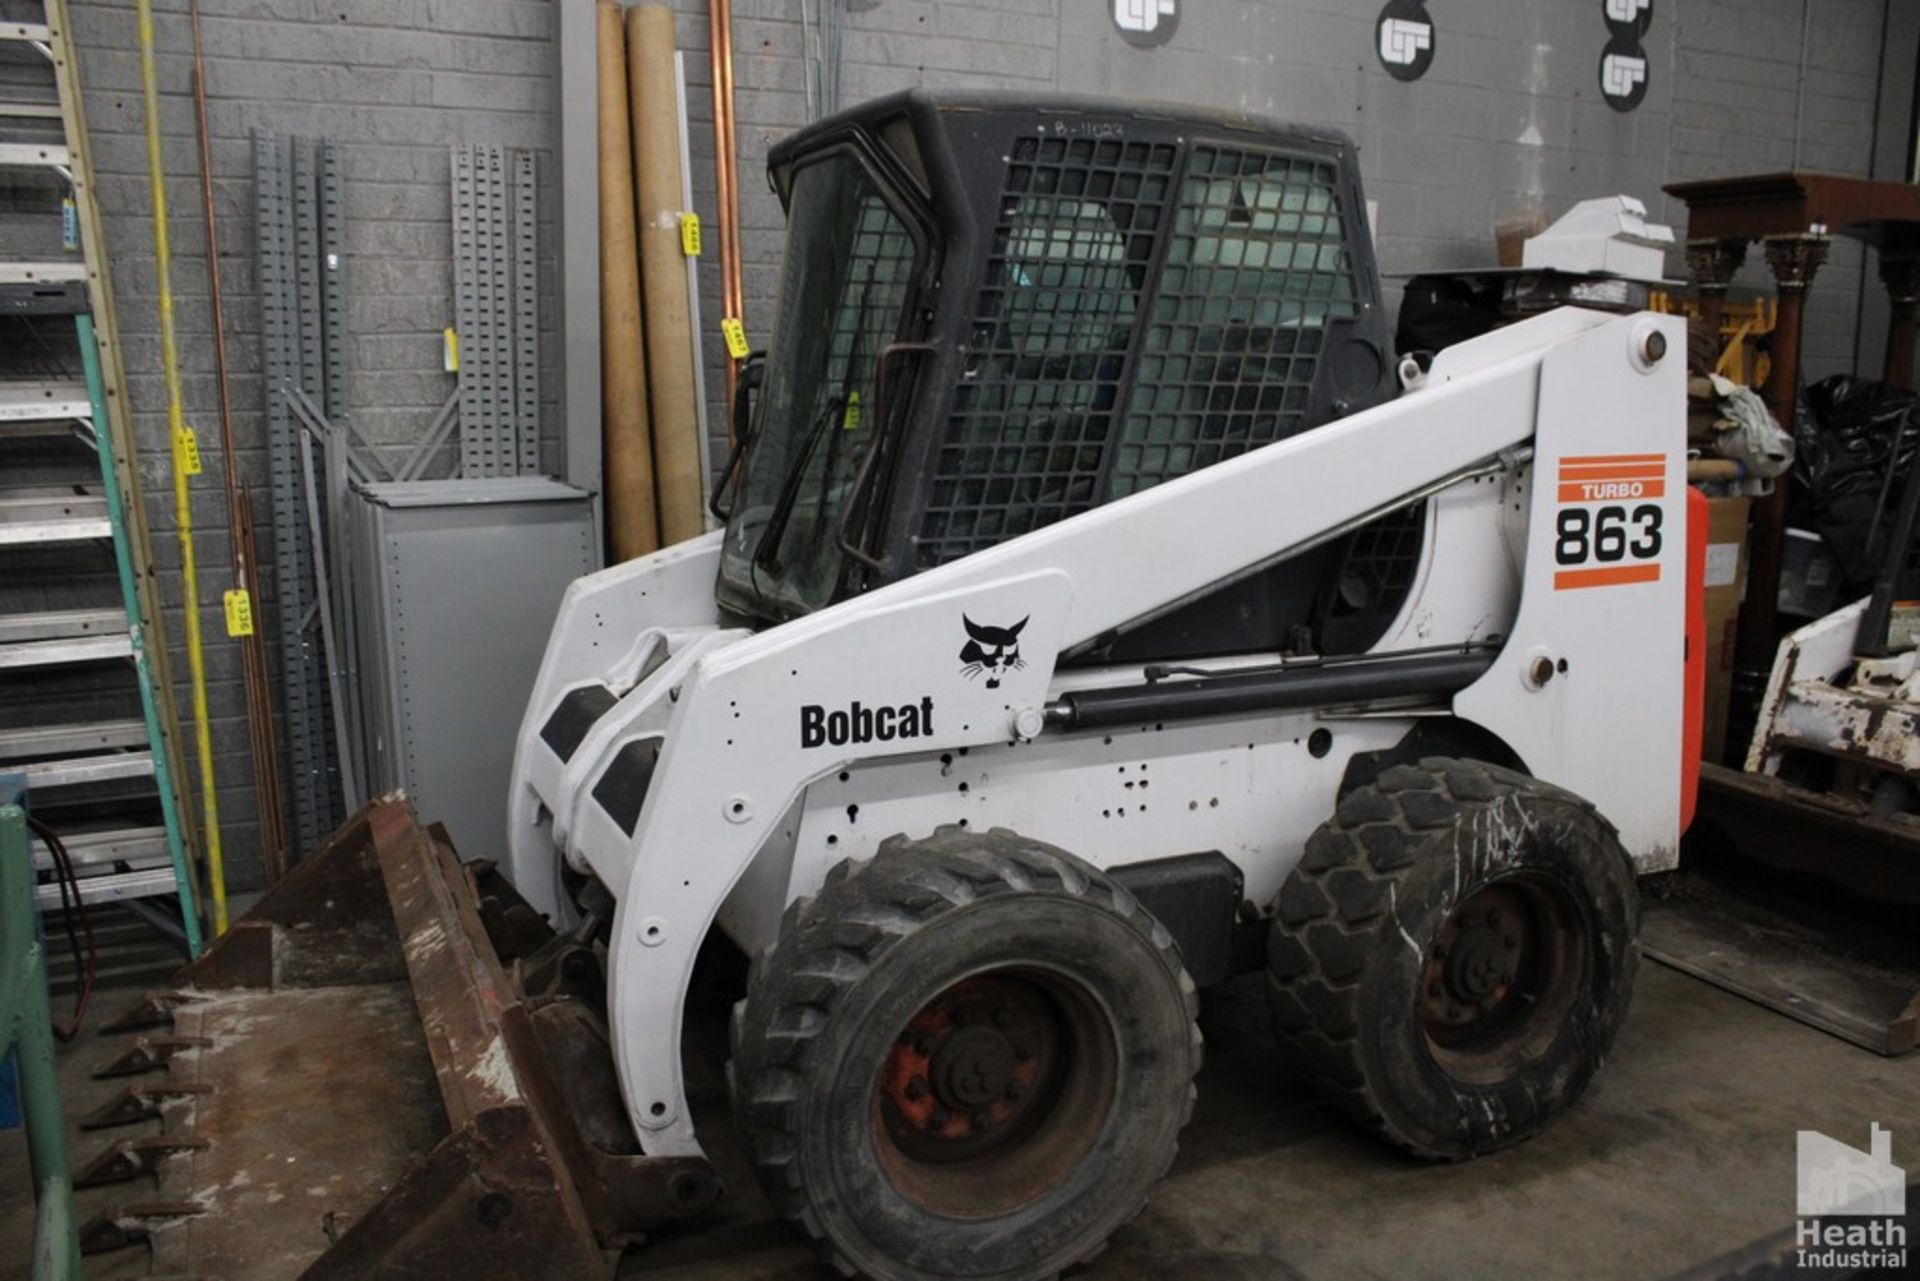 BOBCAT 863 SKID LOADER, DUETZ 4-CYLINDER DIESEL ENGINE, CAB WITH HEAT AND A/C, AUXILLARY HYDRAULICS